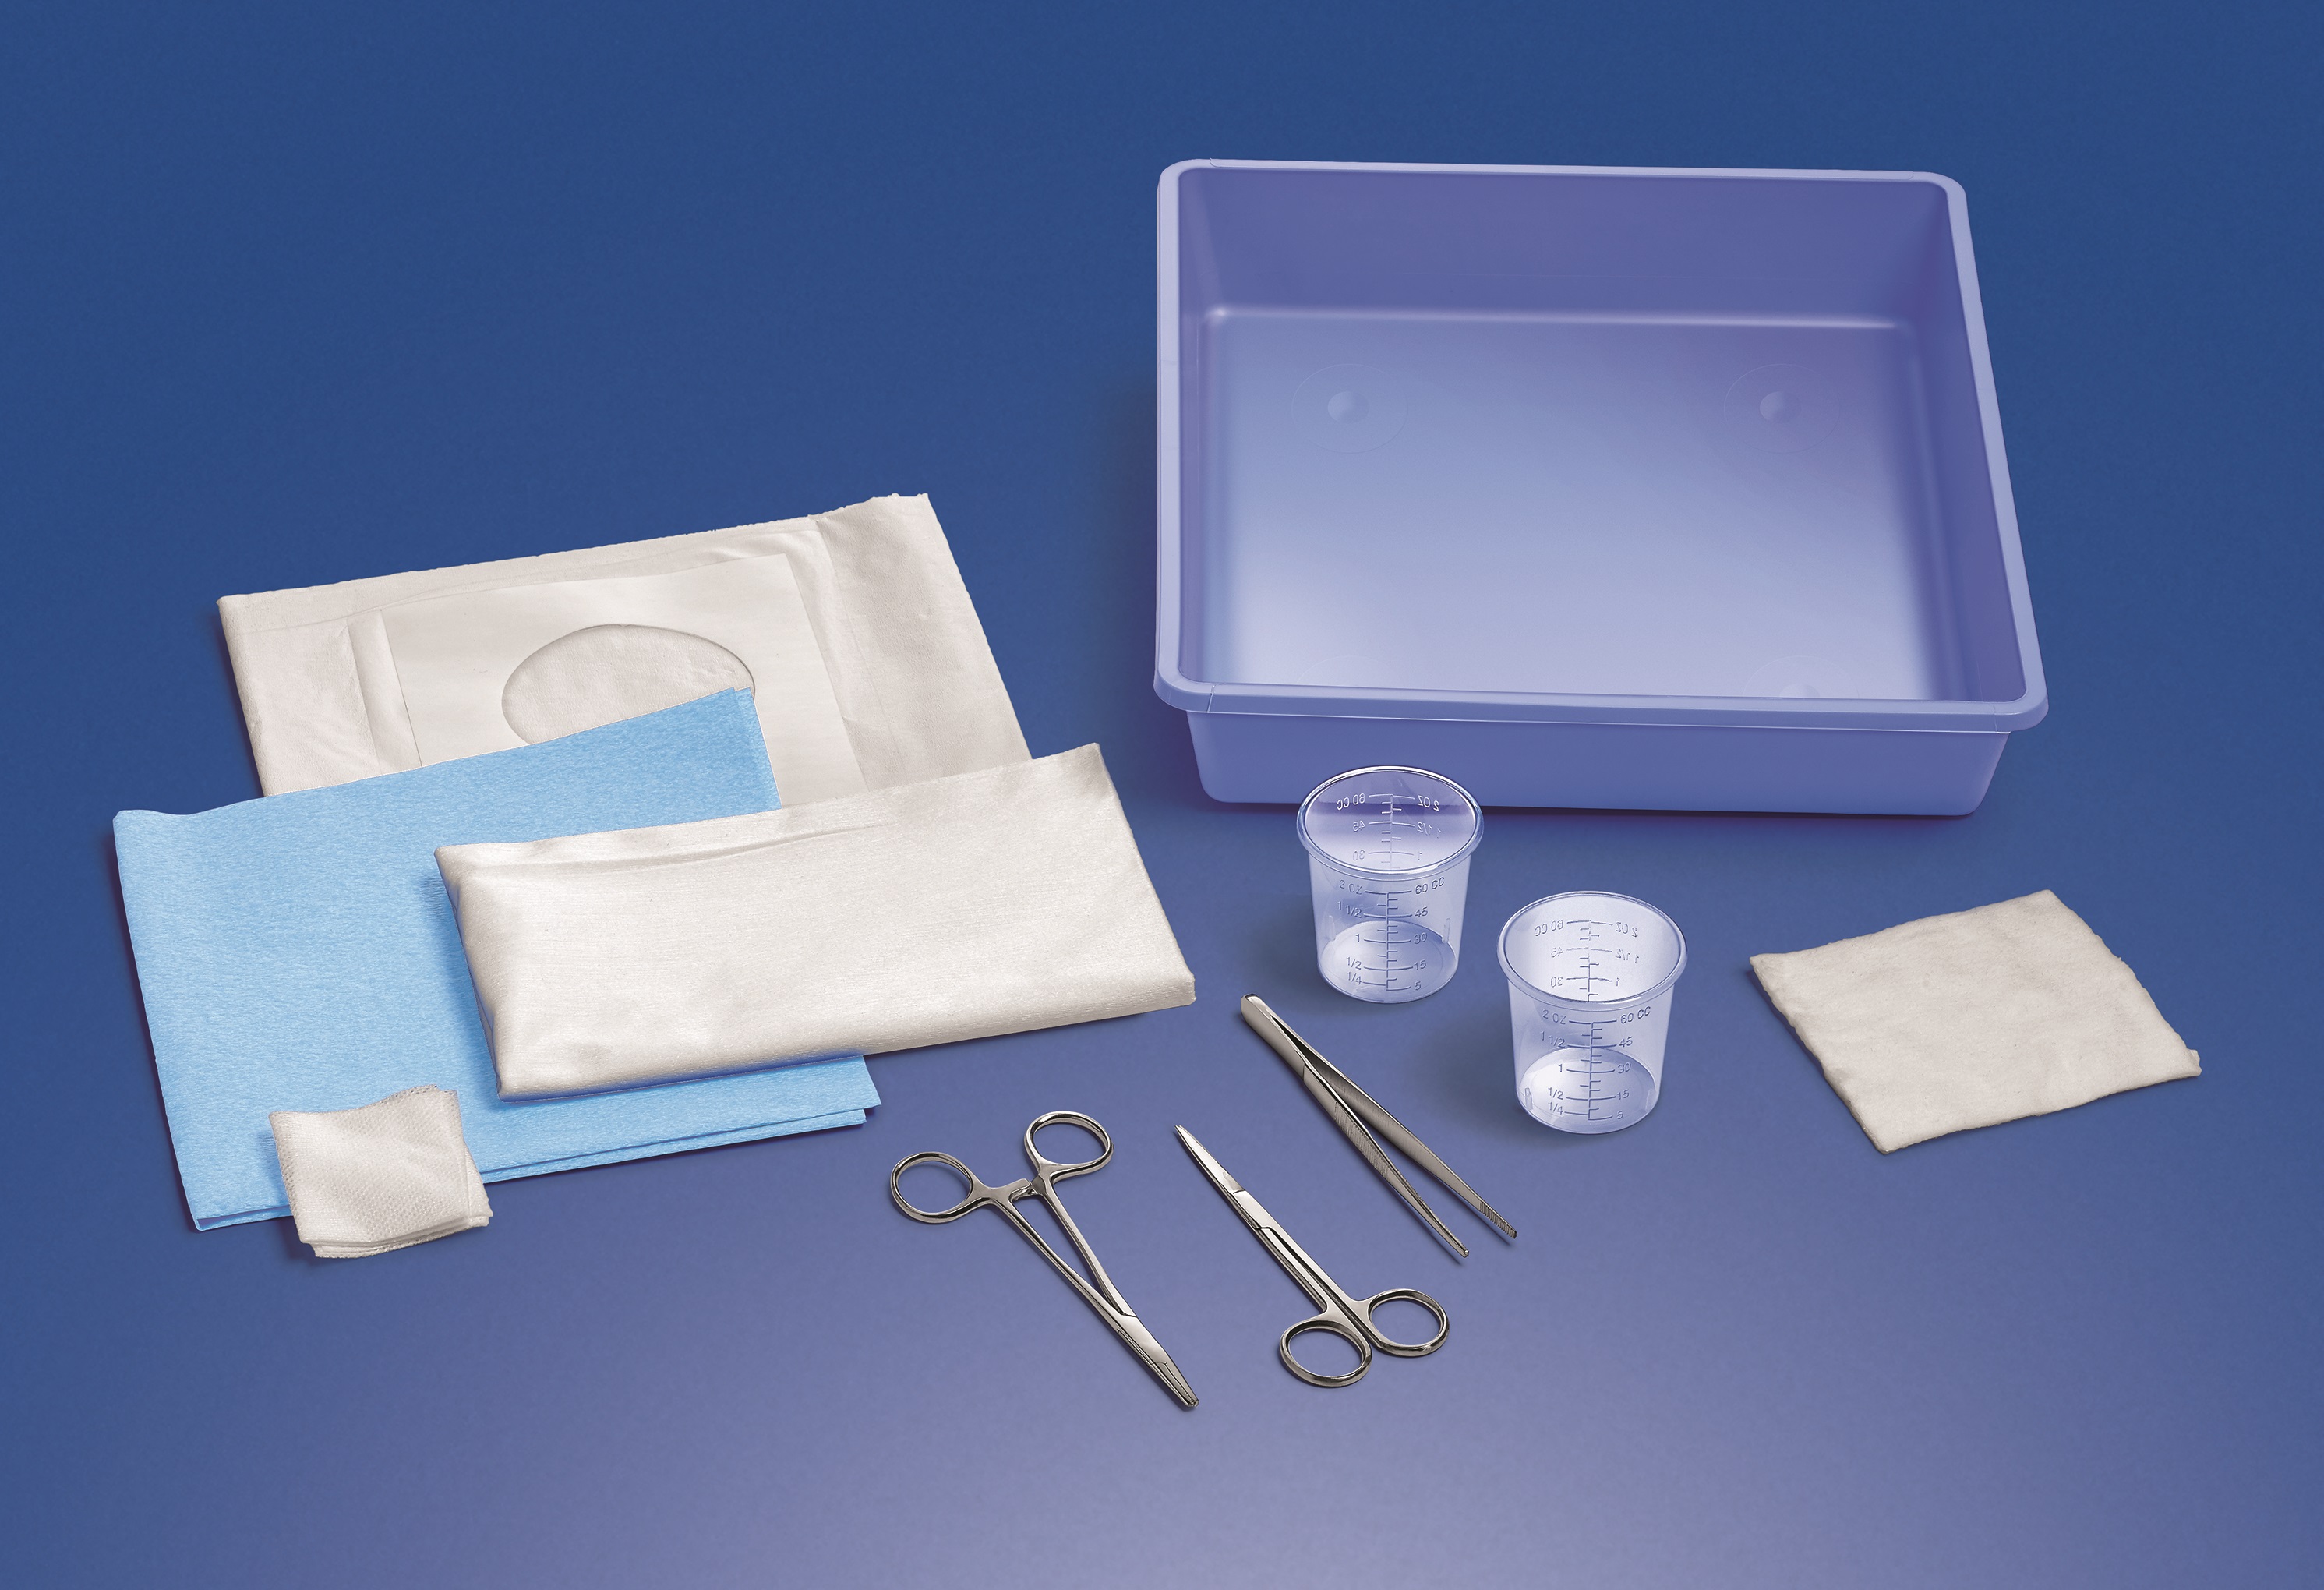 Assemble your next procedure kit with components from Qosina